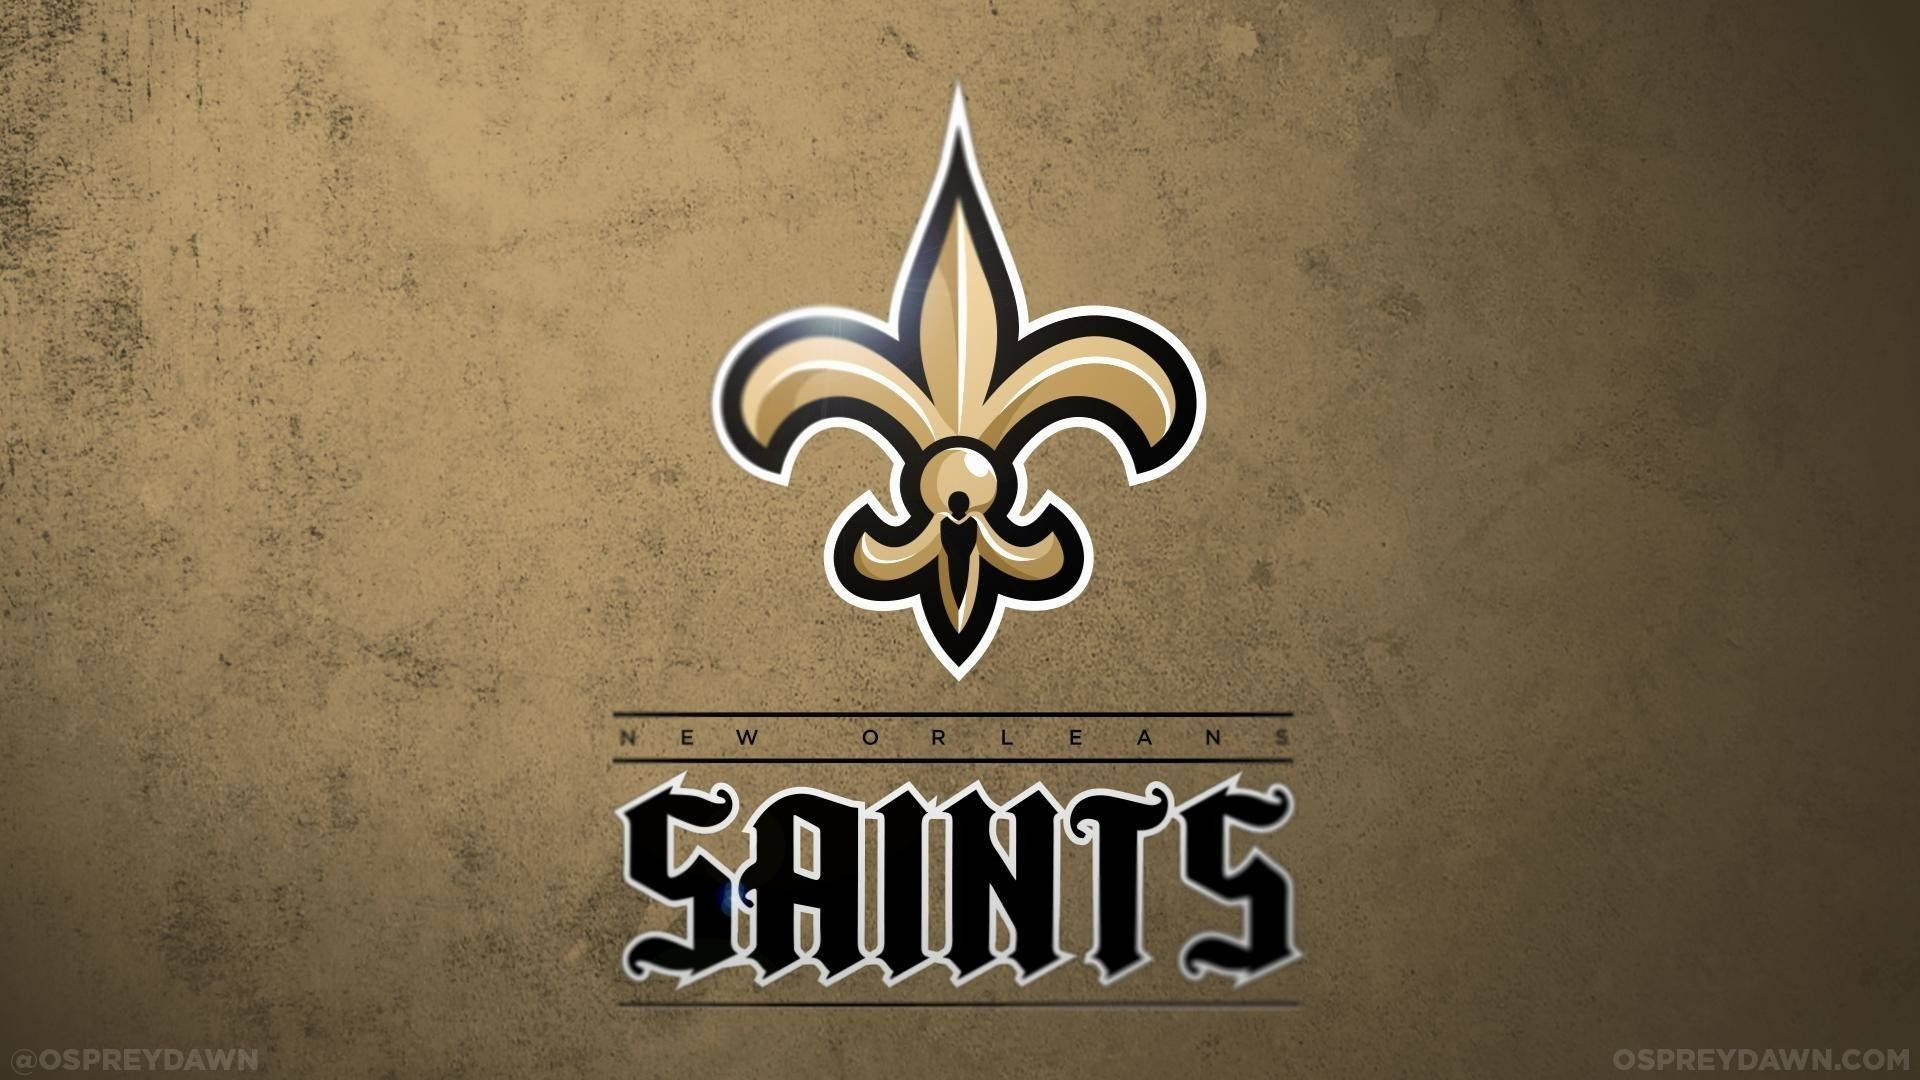 Staggering New Orleans Saints Poster Background